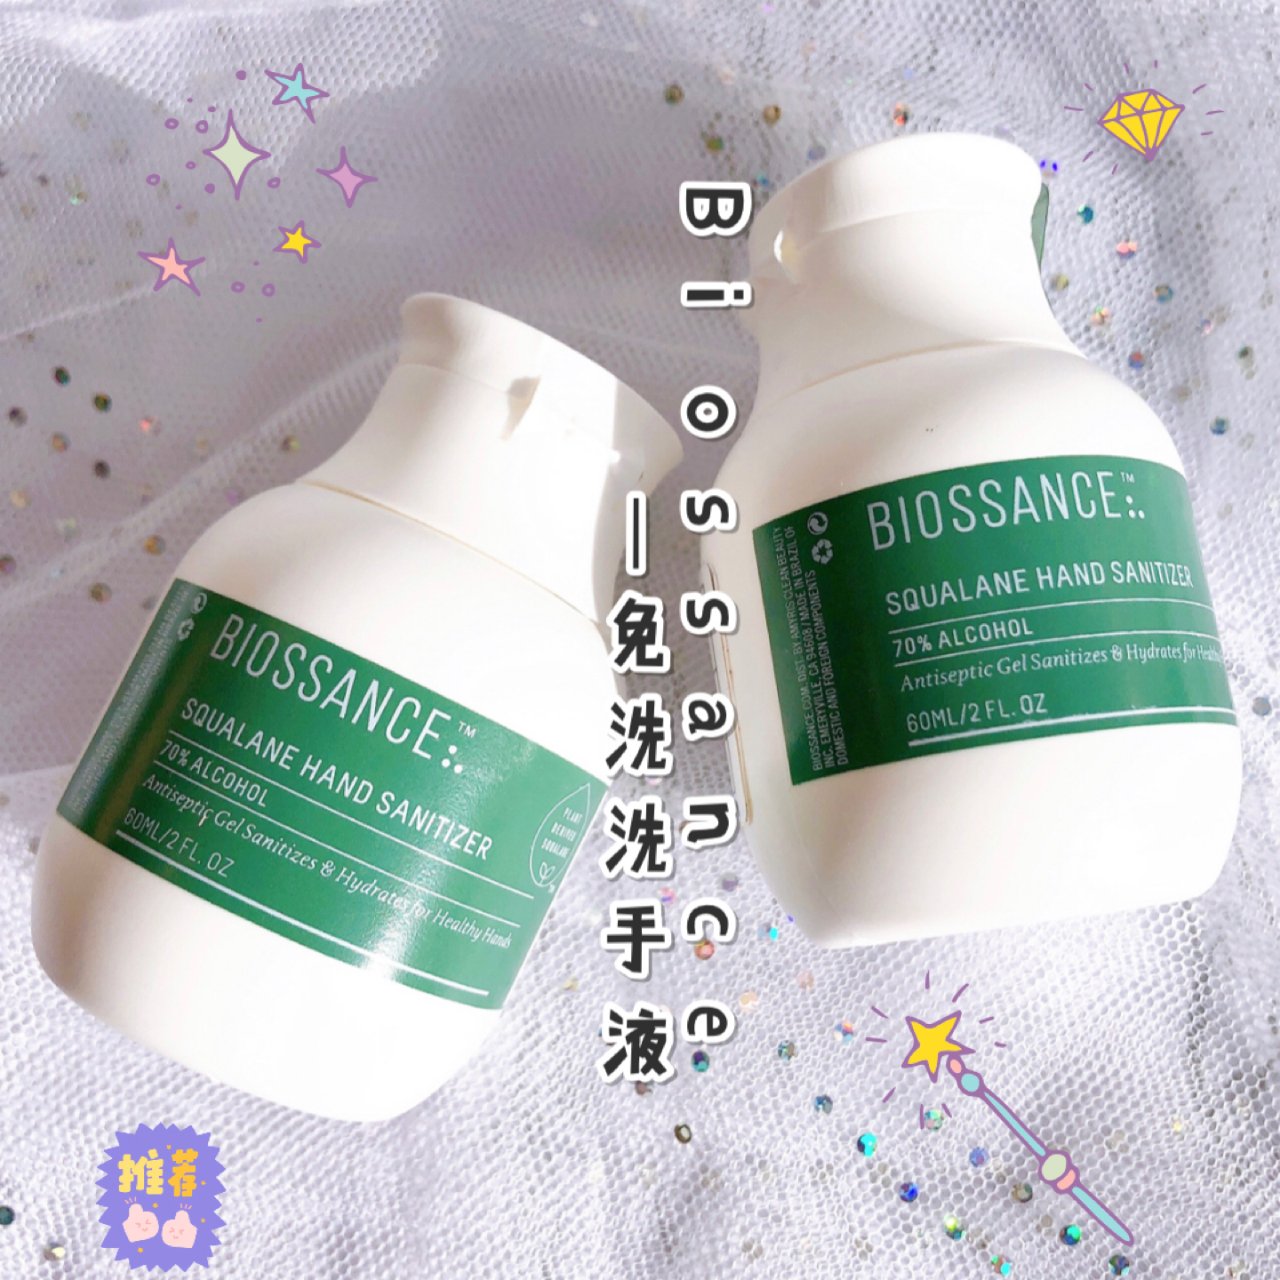 BIOSSANCE,Squalane Hand Sanitizer with 70% Alcohol